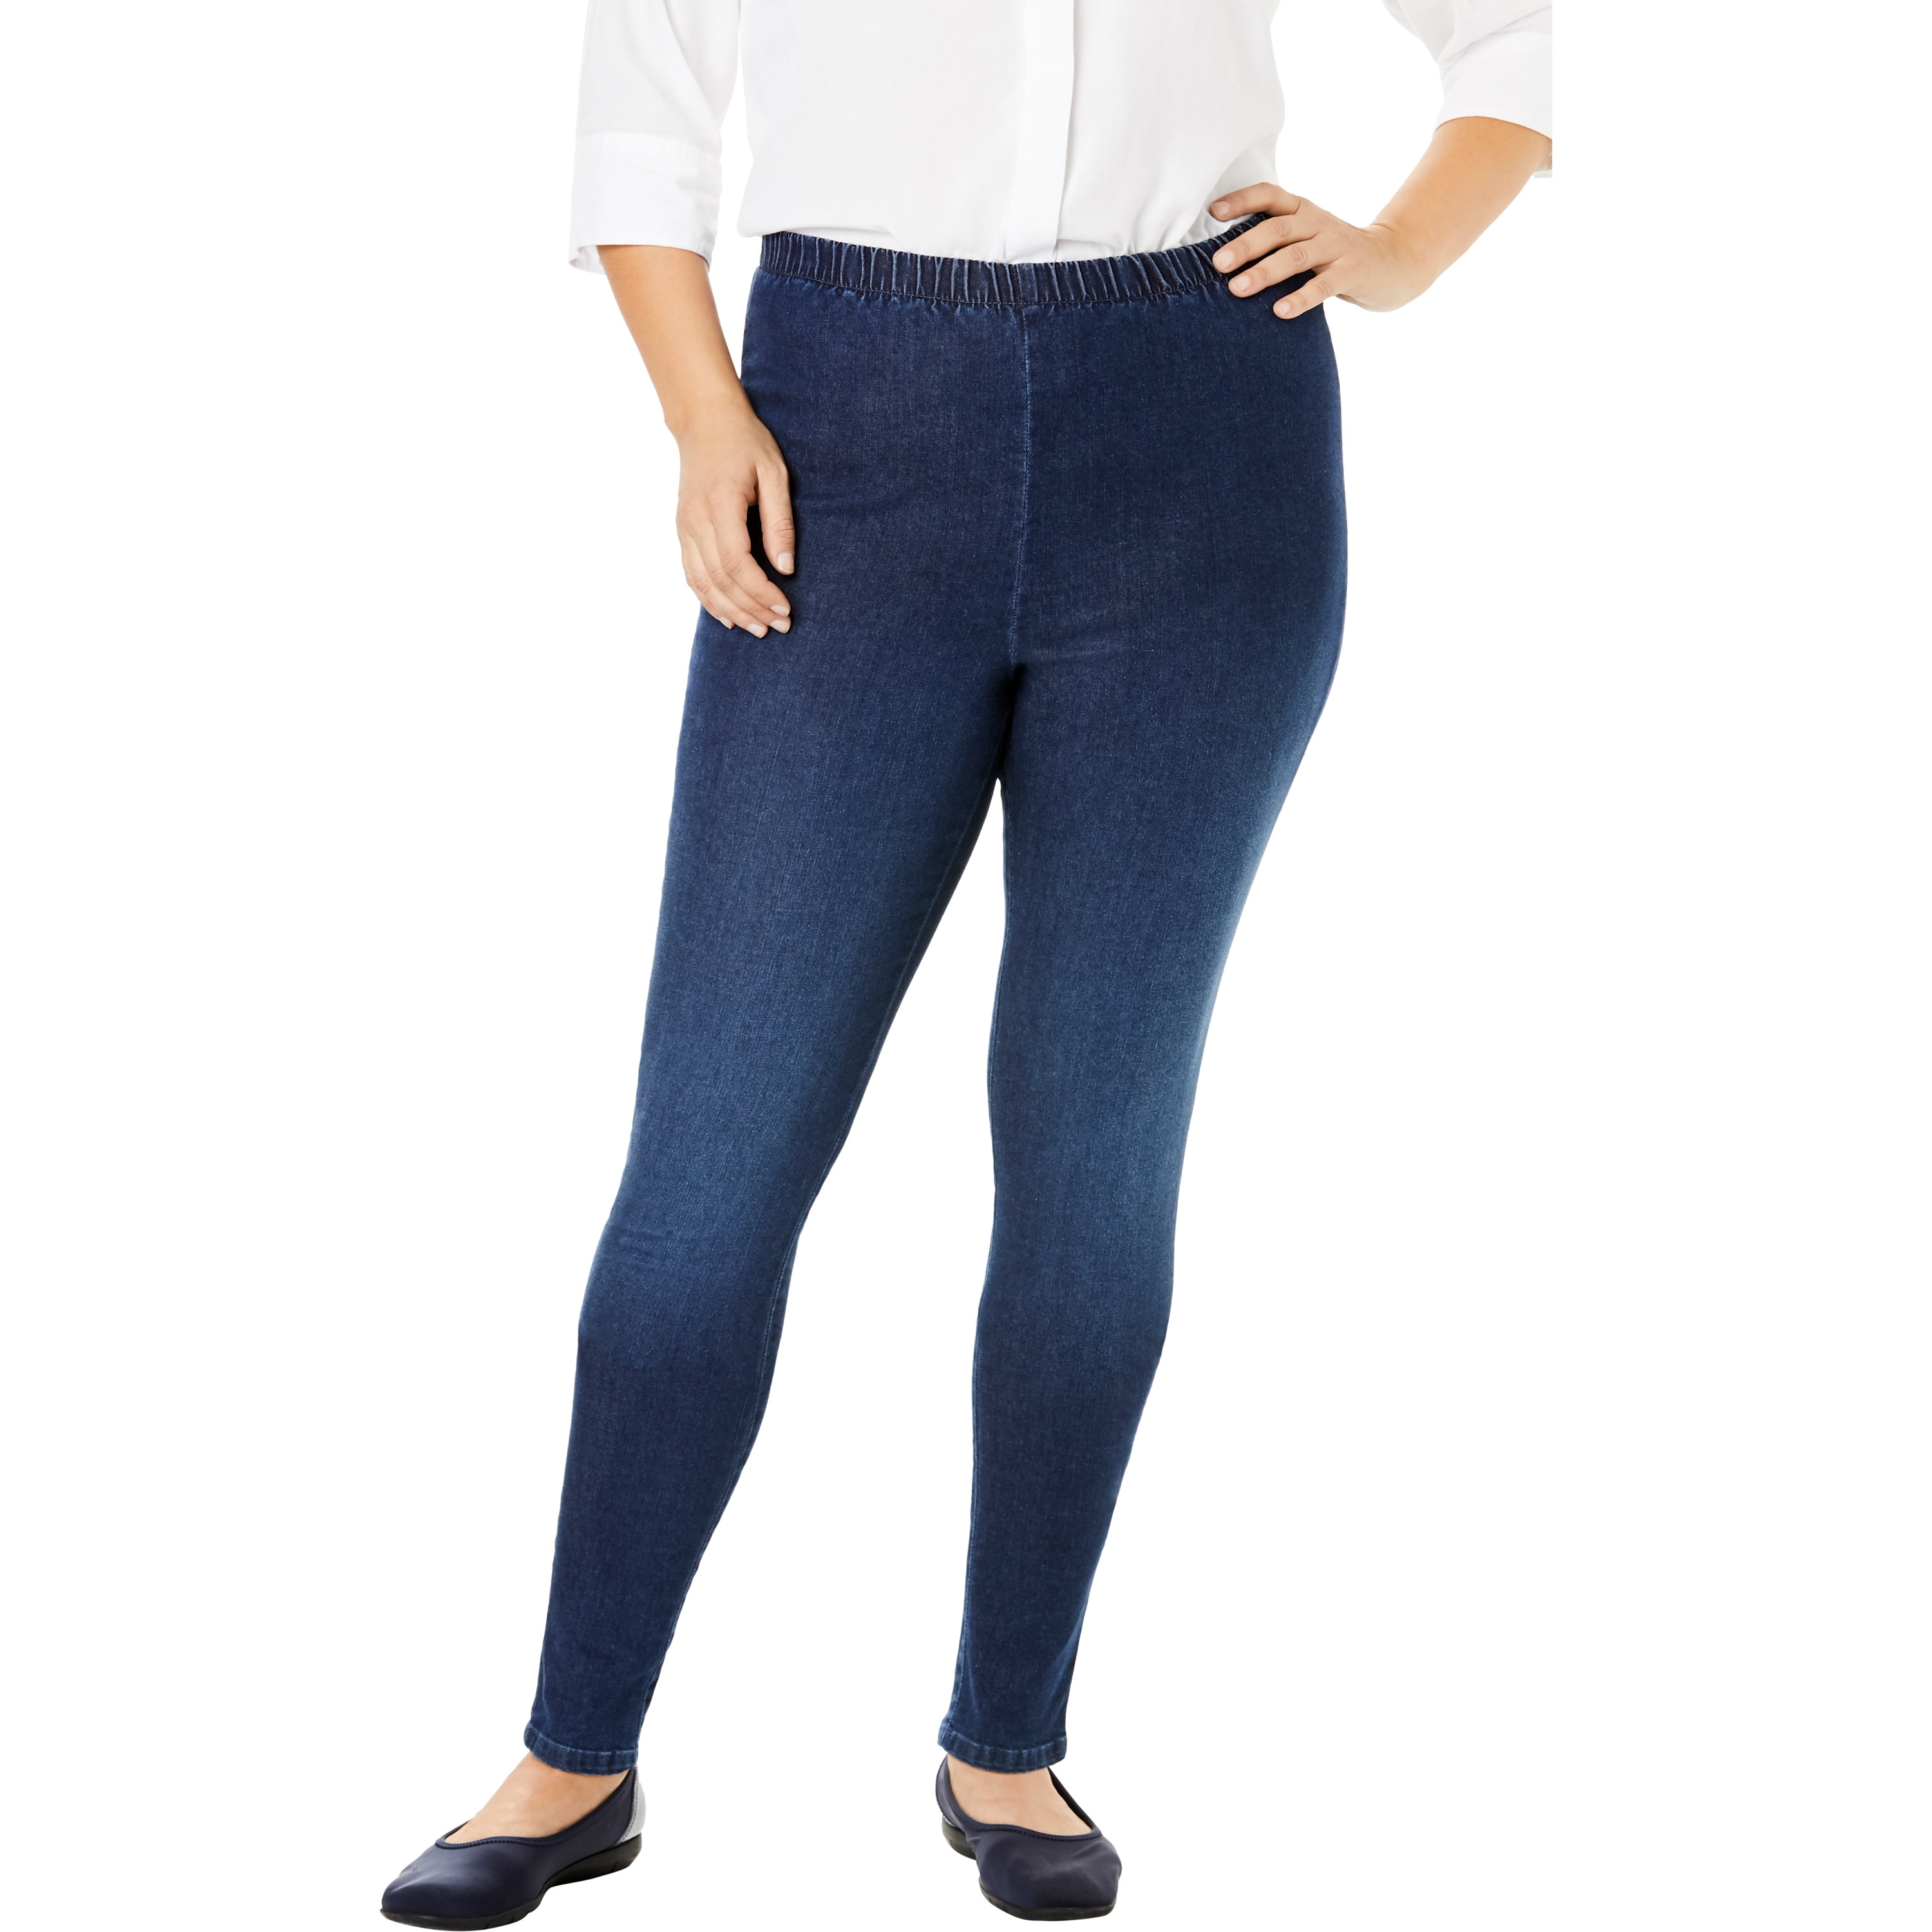 Woman Within - Woman Within Plus Size Tall Fineline Denim Jegging ...